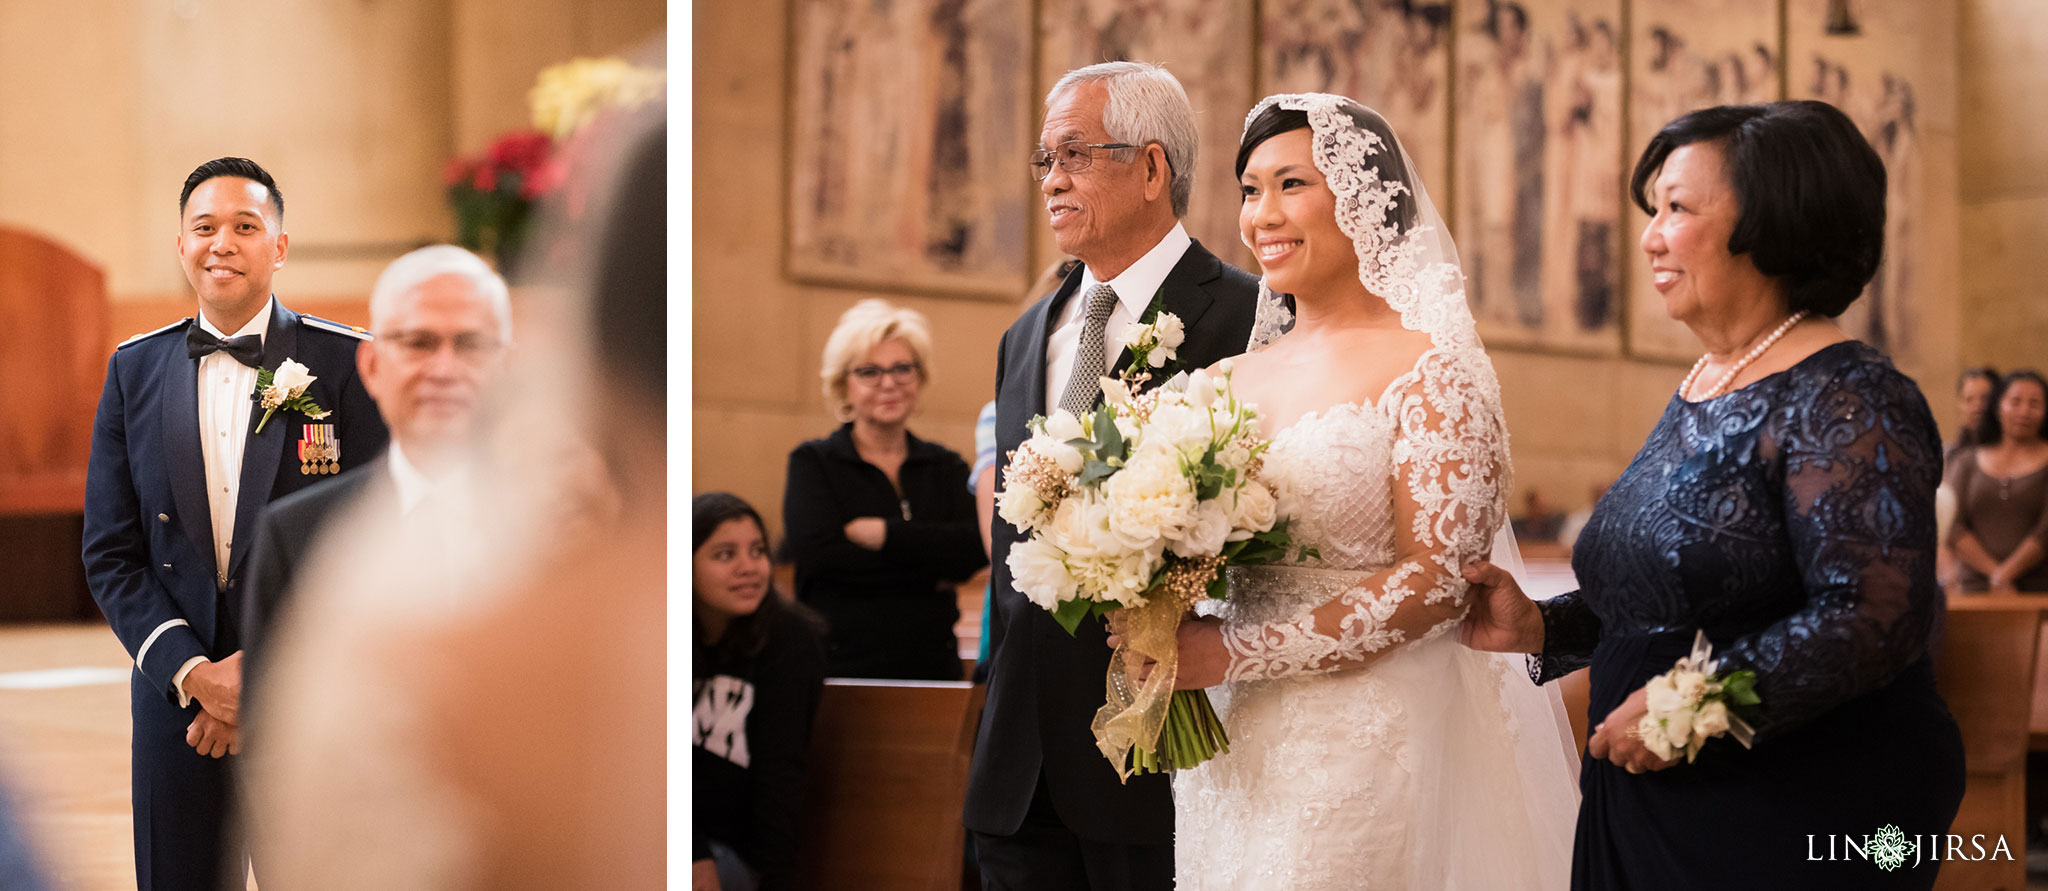 18 cathedral of our lady of angels wedding ceremony photography